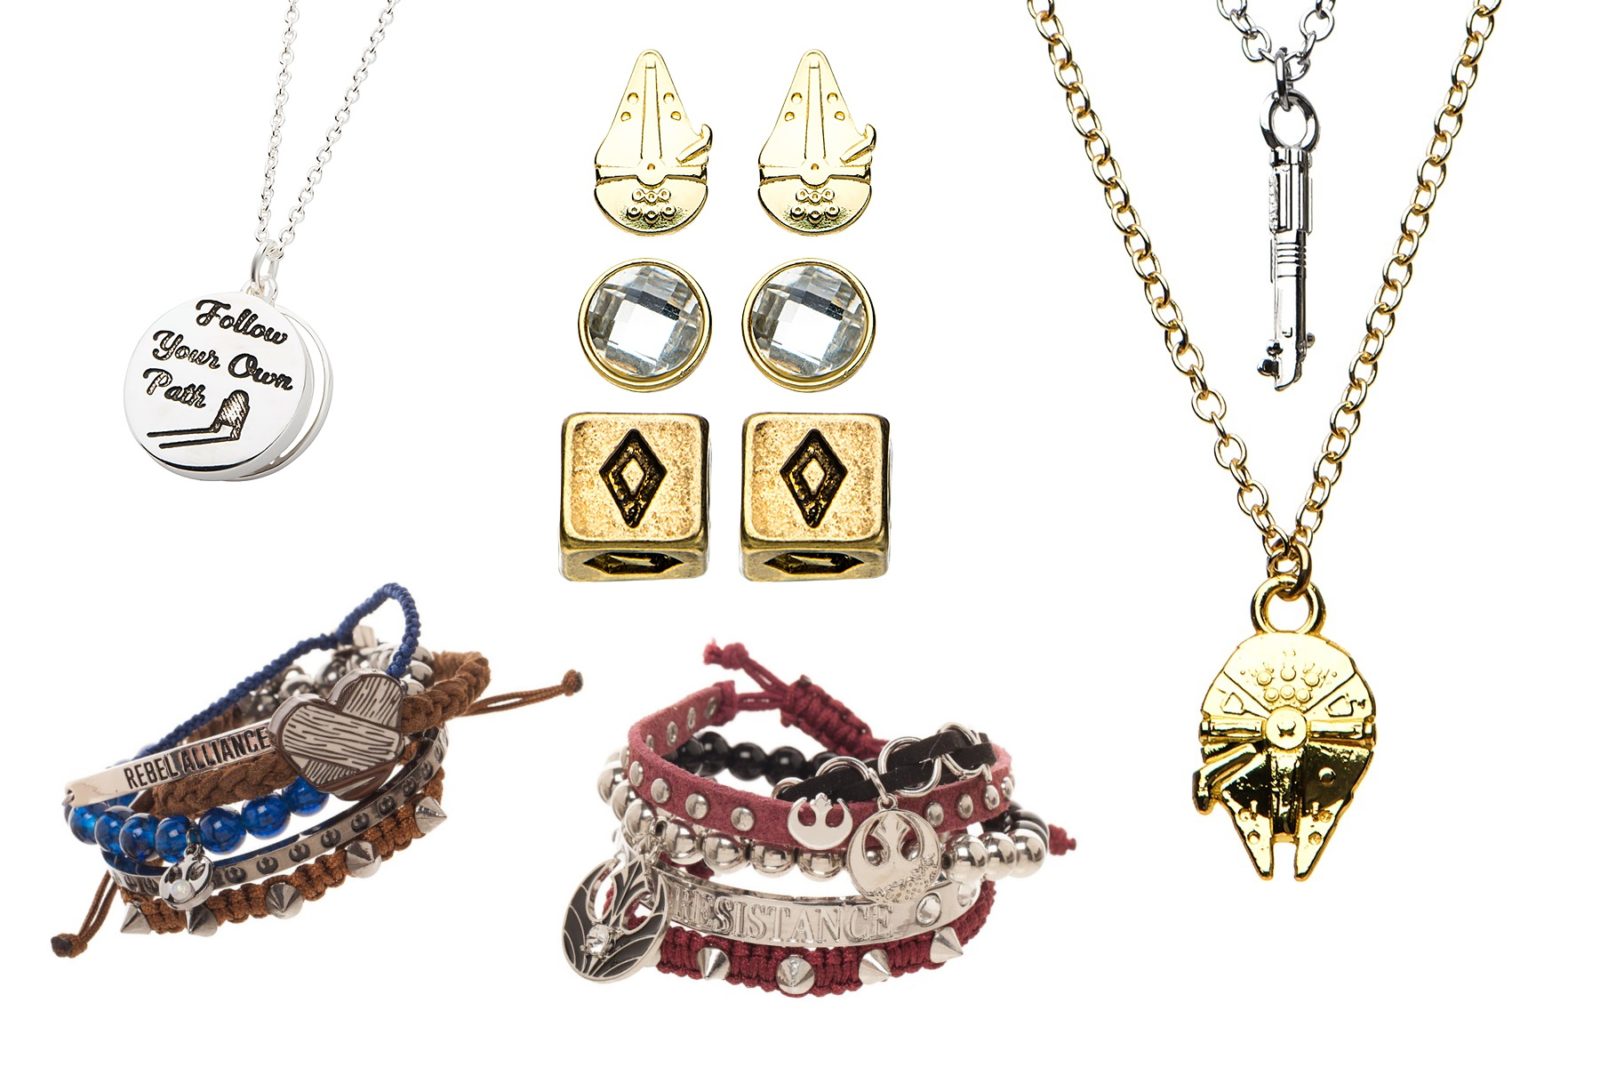 Star Wars Jewelry on Sale Now at Zulily